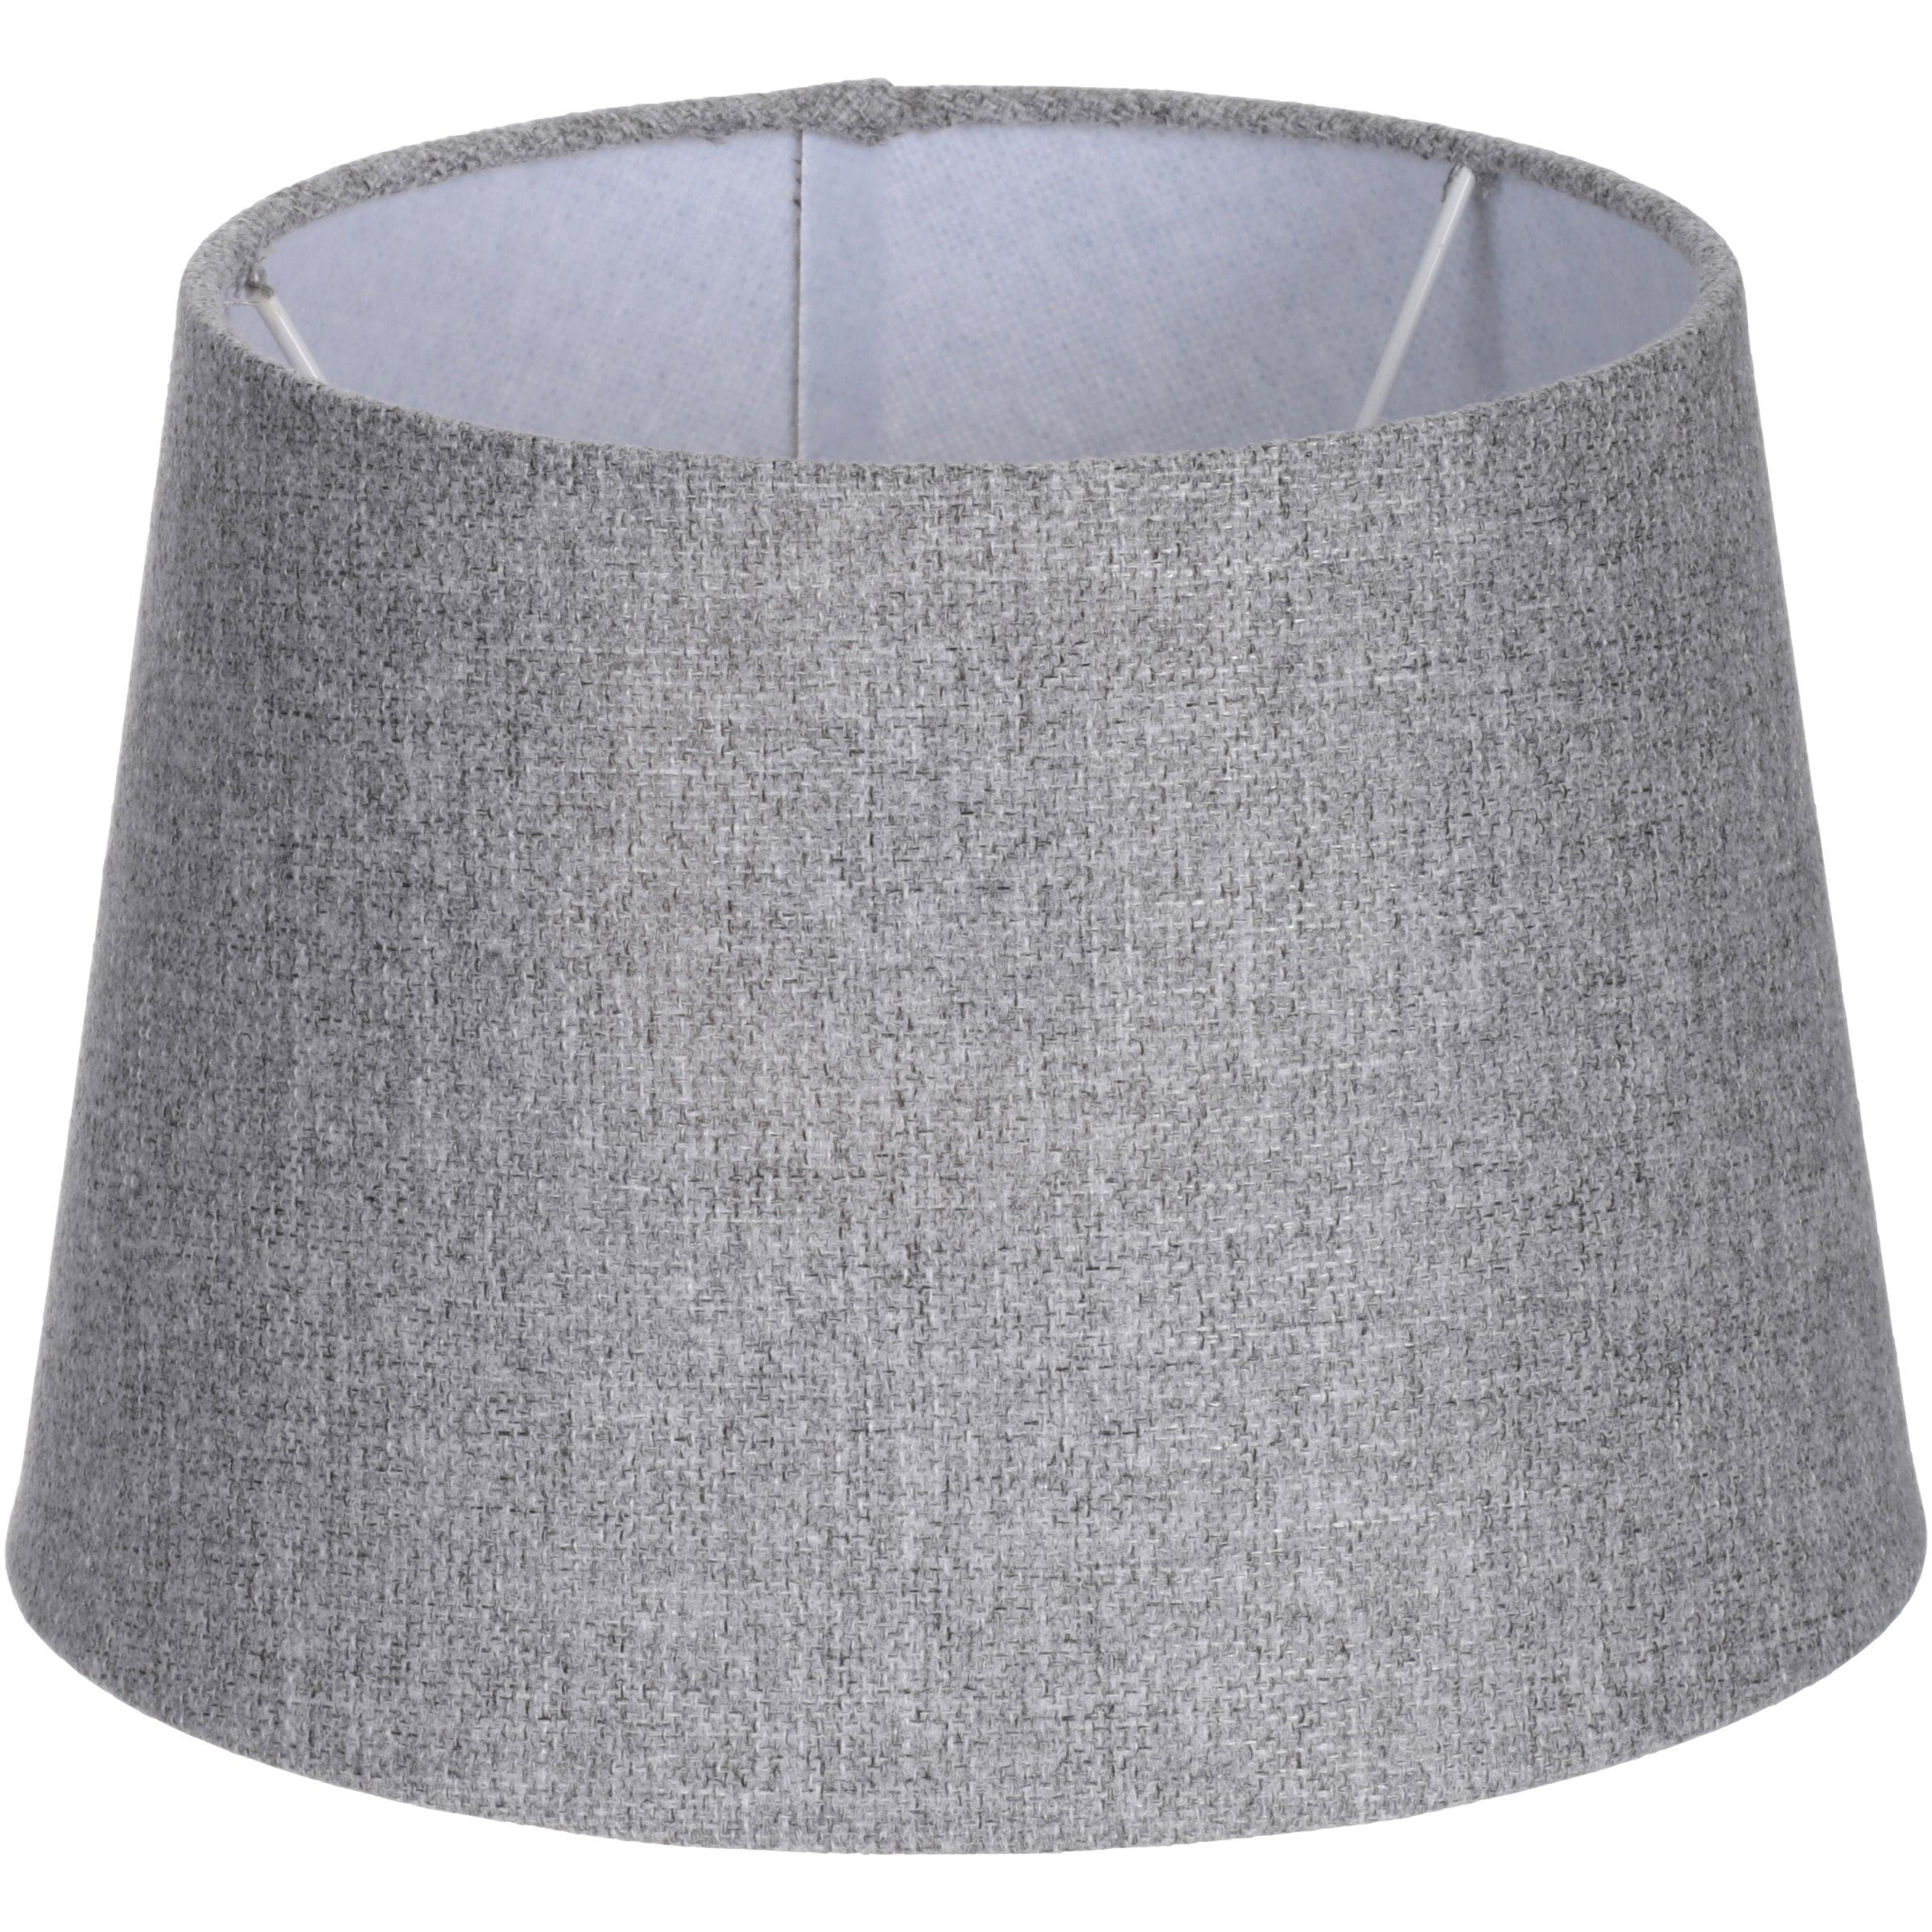 Better Homes & Gardens Gray Tweed Tapered Drum Accent Lamp Shade